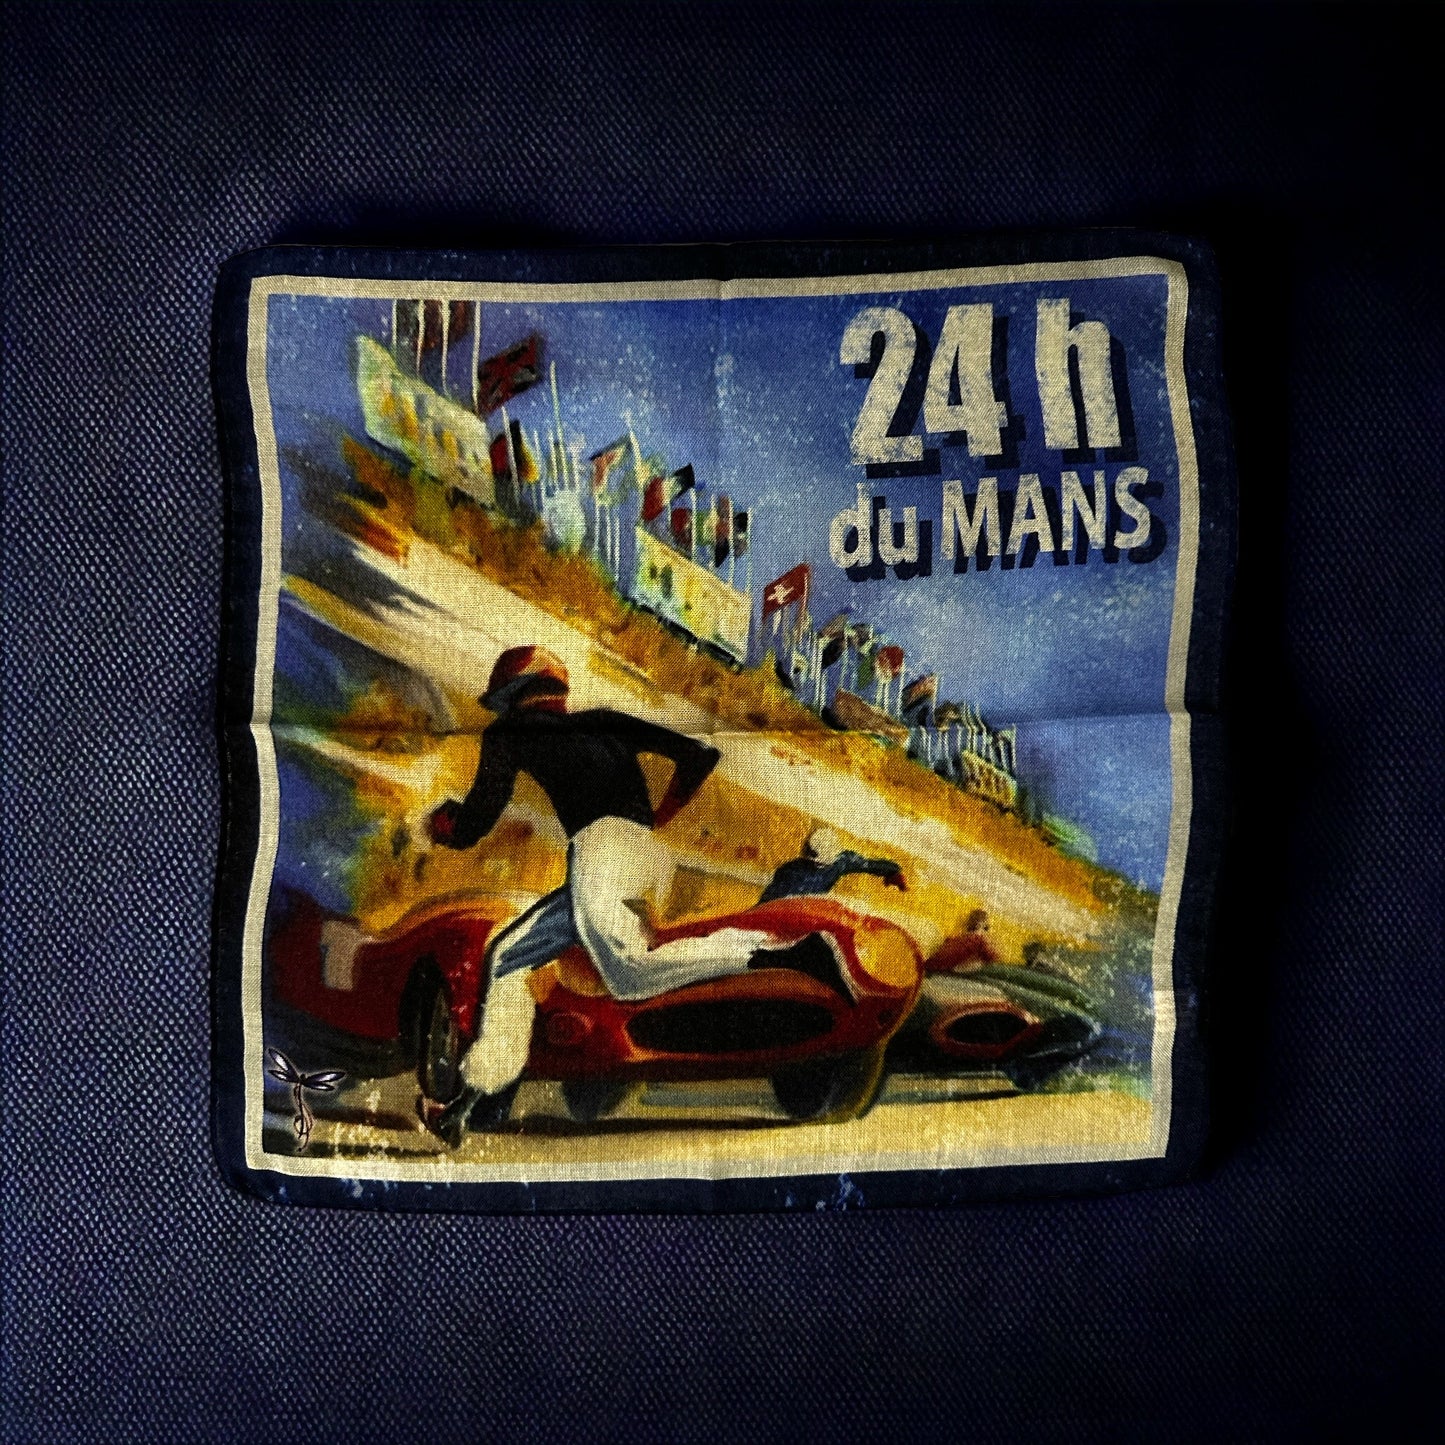 New designs in beautiful and colorful handkerchief for your new sport jacket or suit. Adding color and casualness to any outfit these pocket squares depict different exotic cities across the world. Here we have 24 hours of Le Mans auto race in France. Picturing the nostalgia of the race with the beginning of racing technology from the 1959 Grand Prix poster by Michel Beligord. Hand rolled edge. Made in Italy. 14 x14 inches.